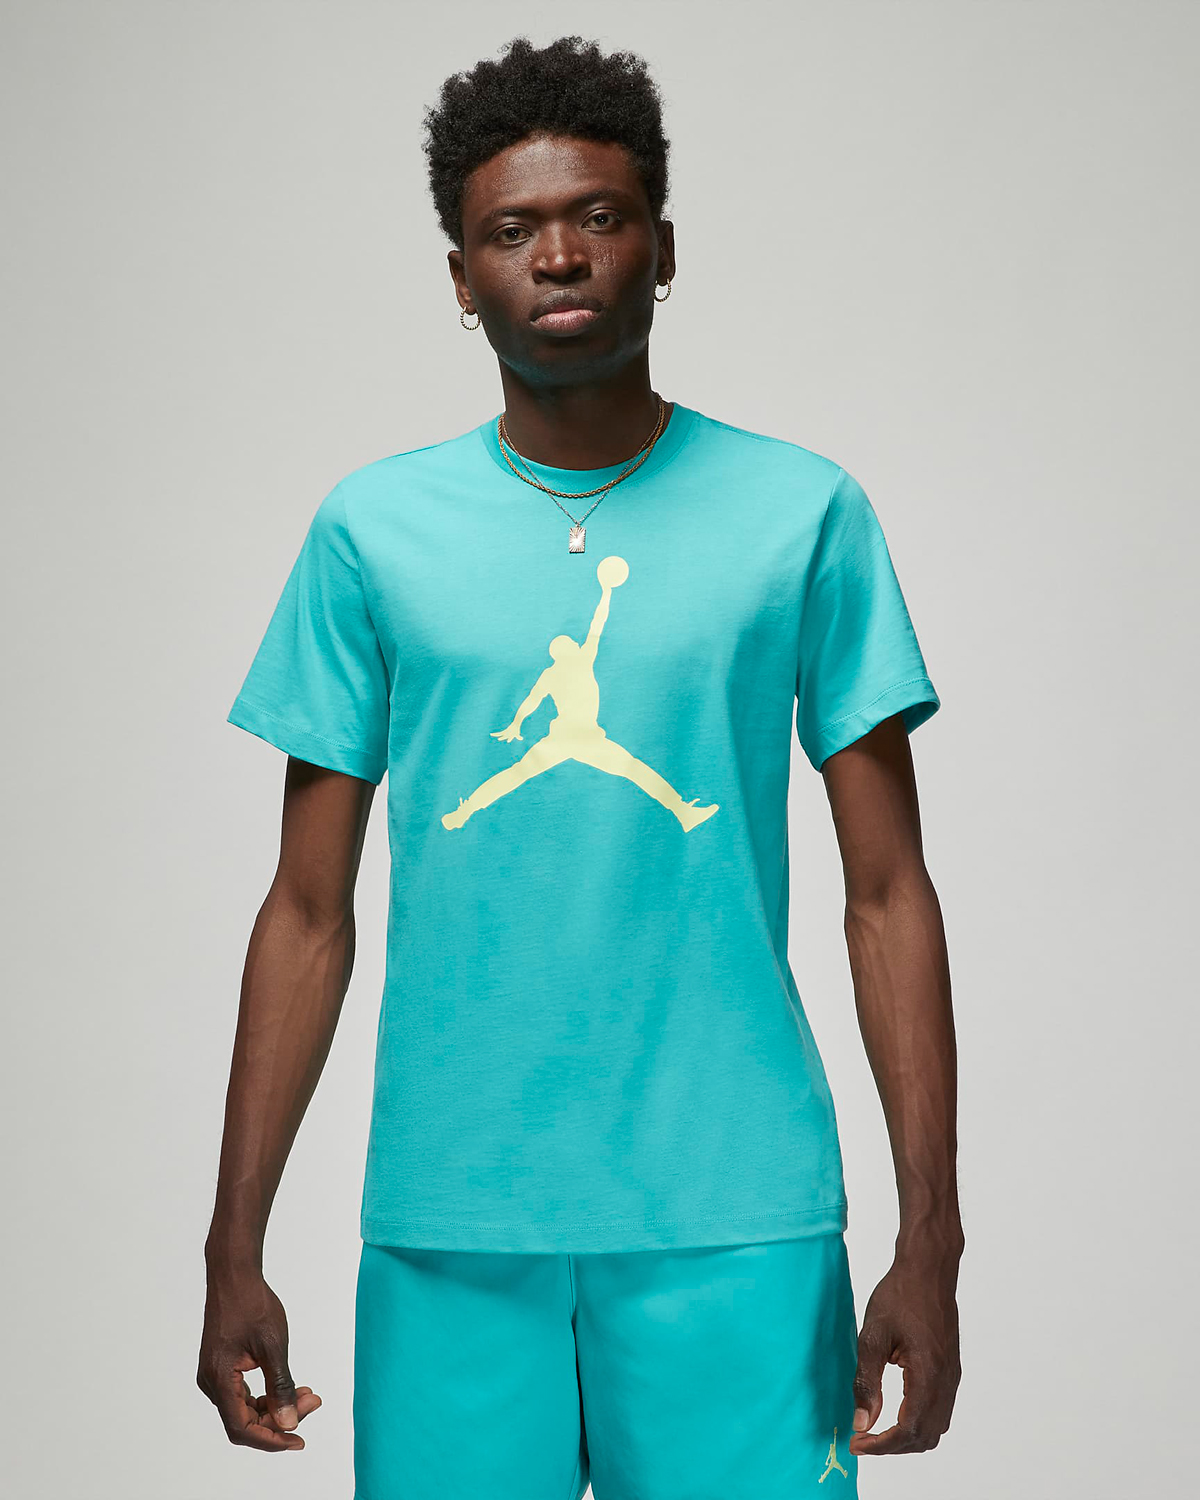 Jordan Washed Teal Shirts Clothing Sneaker Outfits